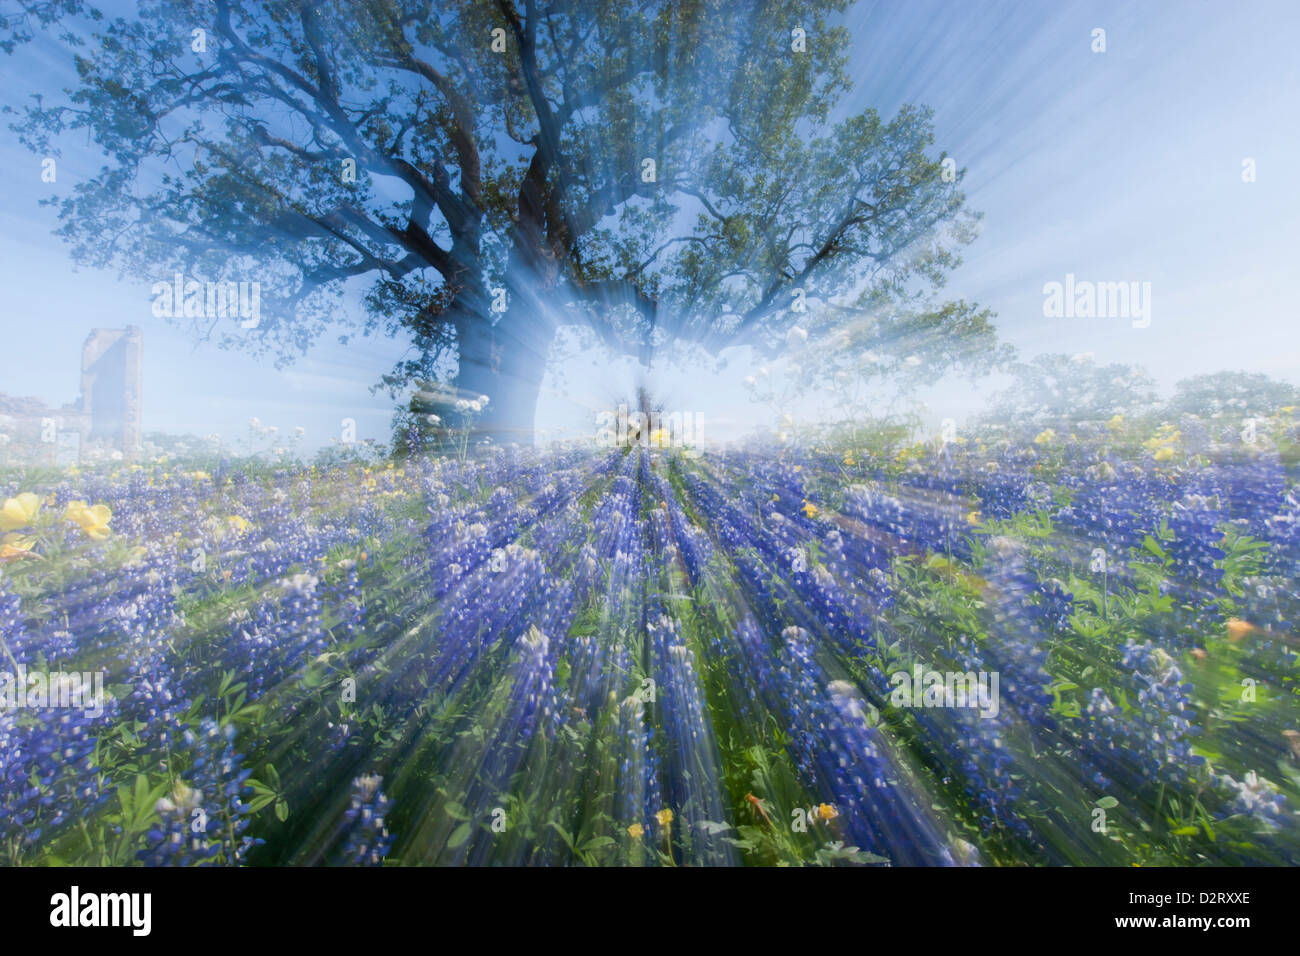 Texas Bluebonnets (Lupinus texensis) in bloom, central Texas, spring Stock Photo